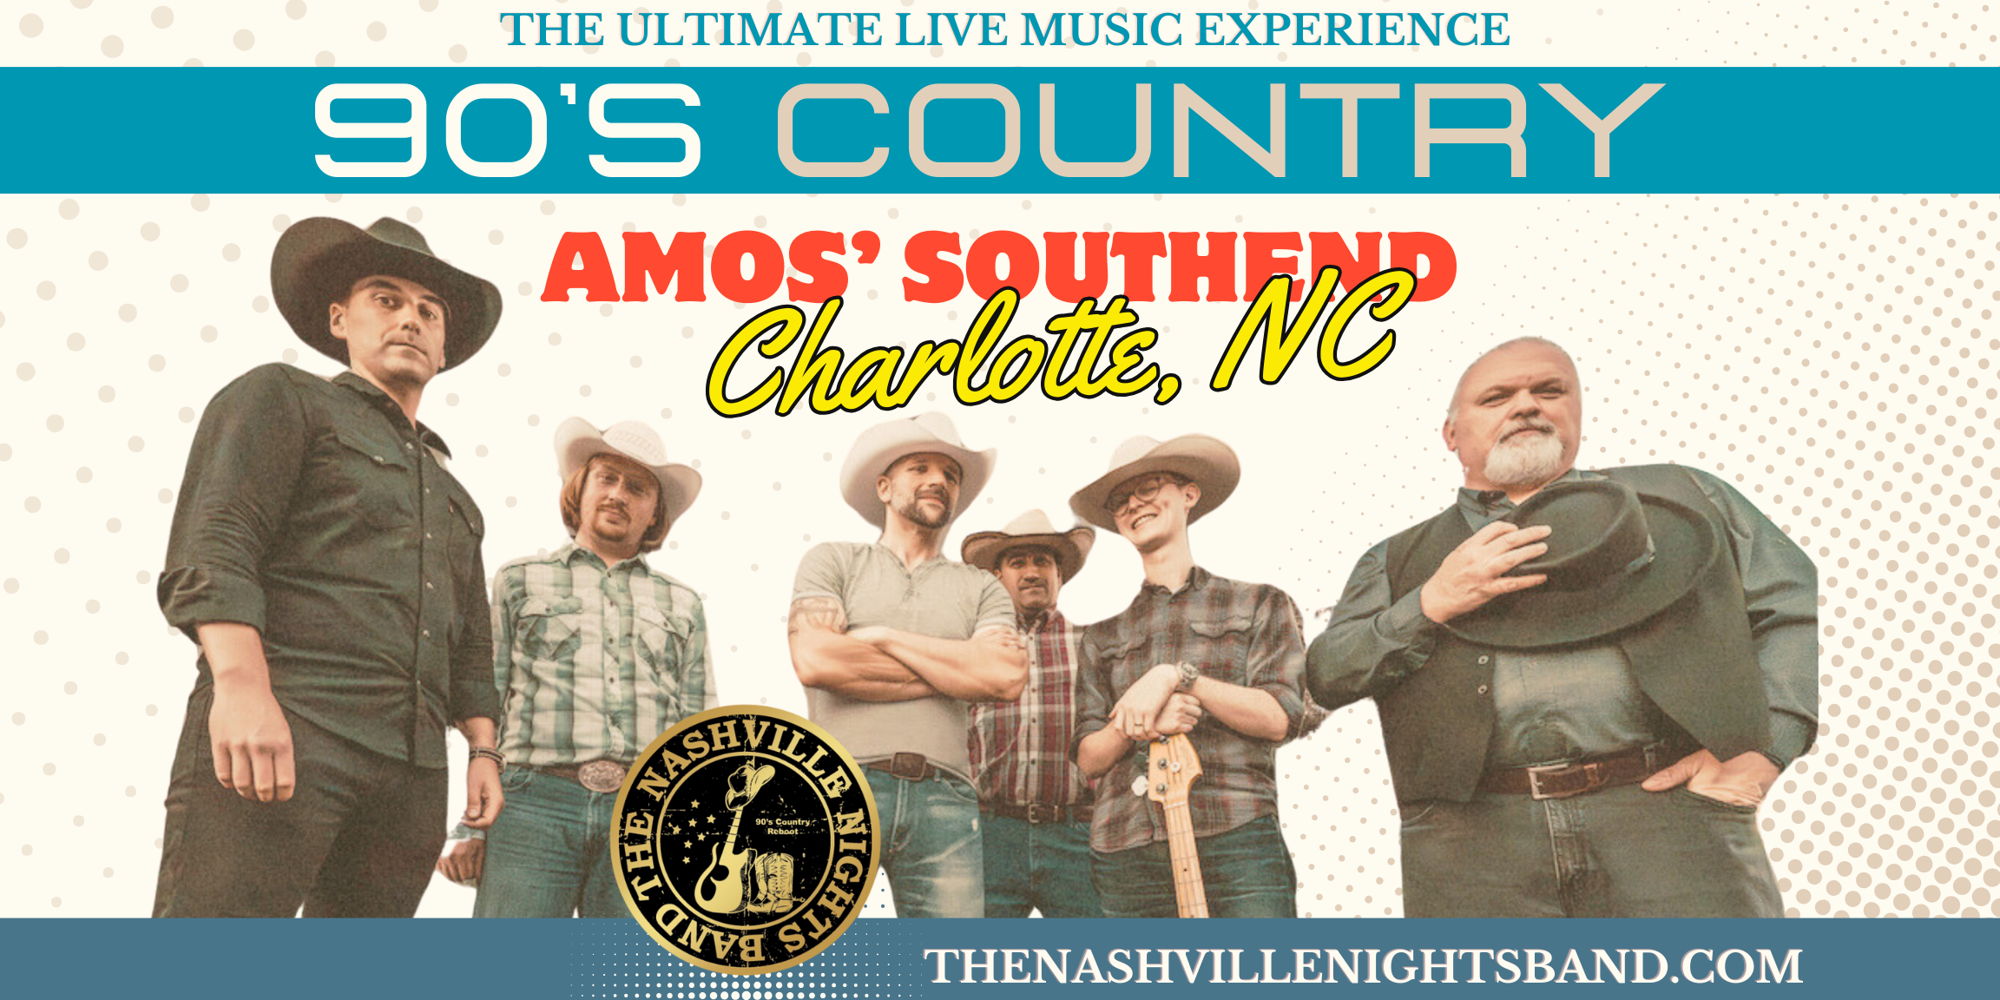 90's Country @ Amos' Southend promotional image